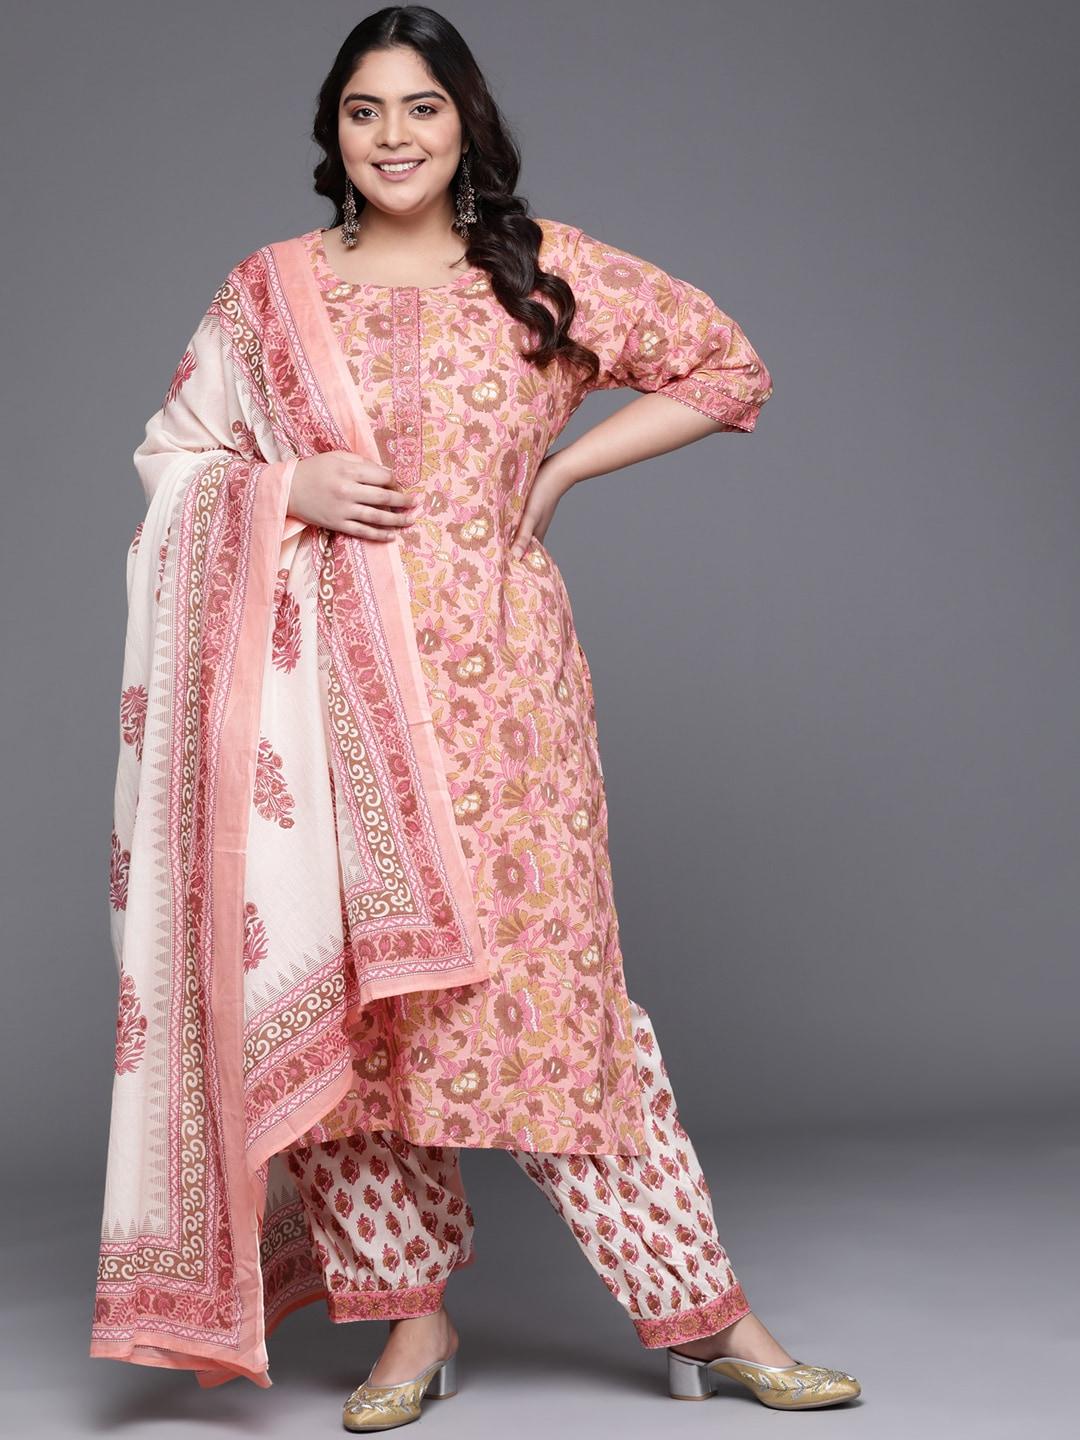 EXTRA LOVE BY LIBAS Women Floral Cotton Kurta with Salwar & With Dupatta